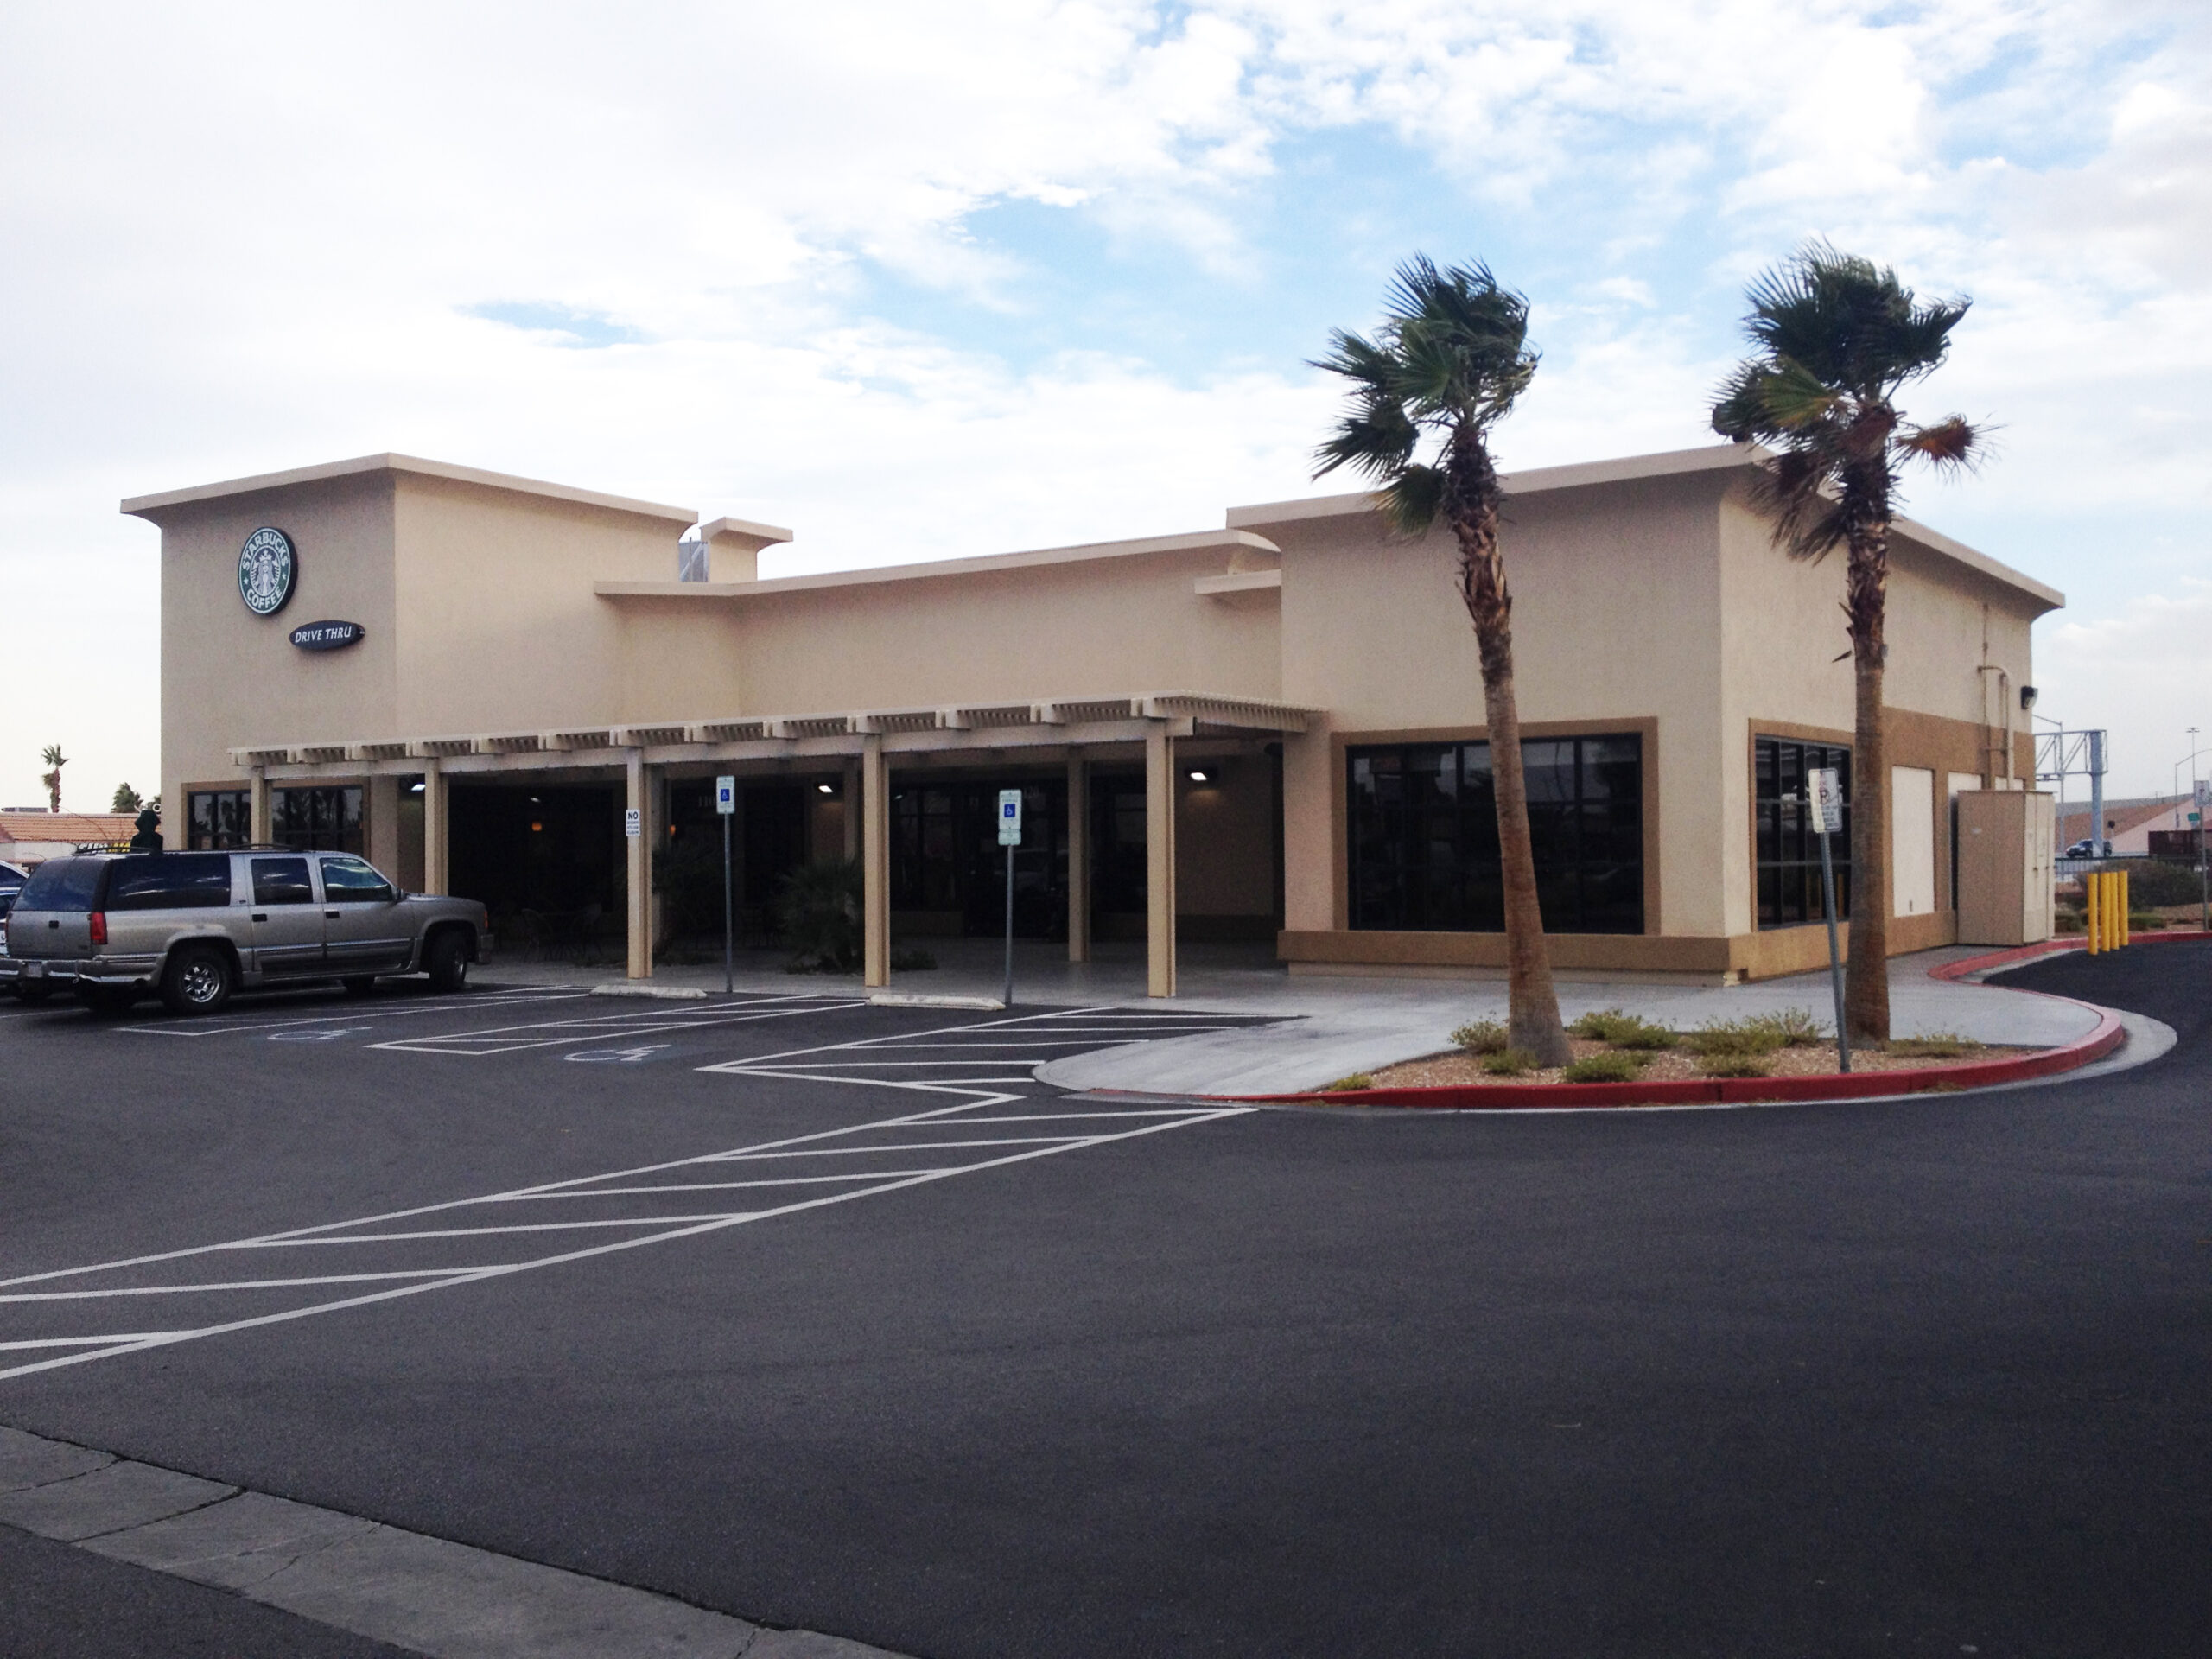 Colliers International – Las Vegas announced today the finalization a lease of an approximately 1,200-square-foot retail property in Las Vegas.